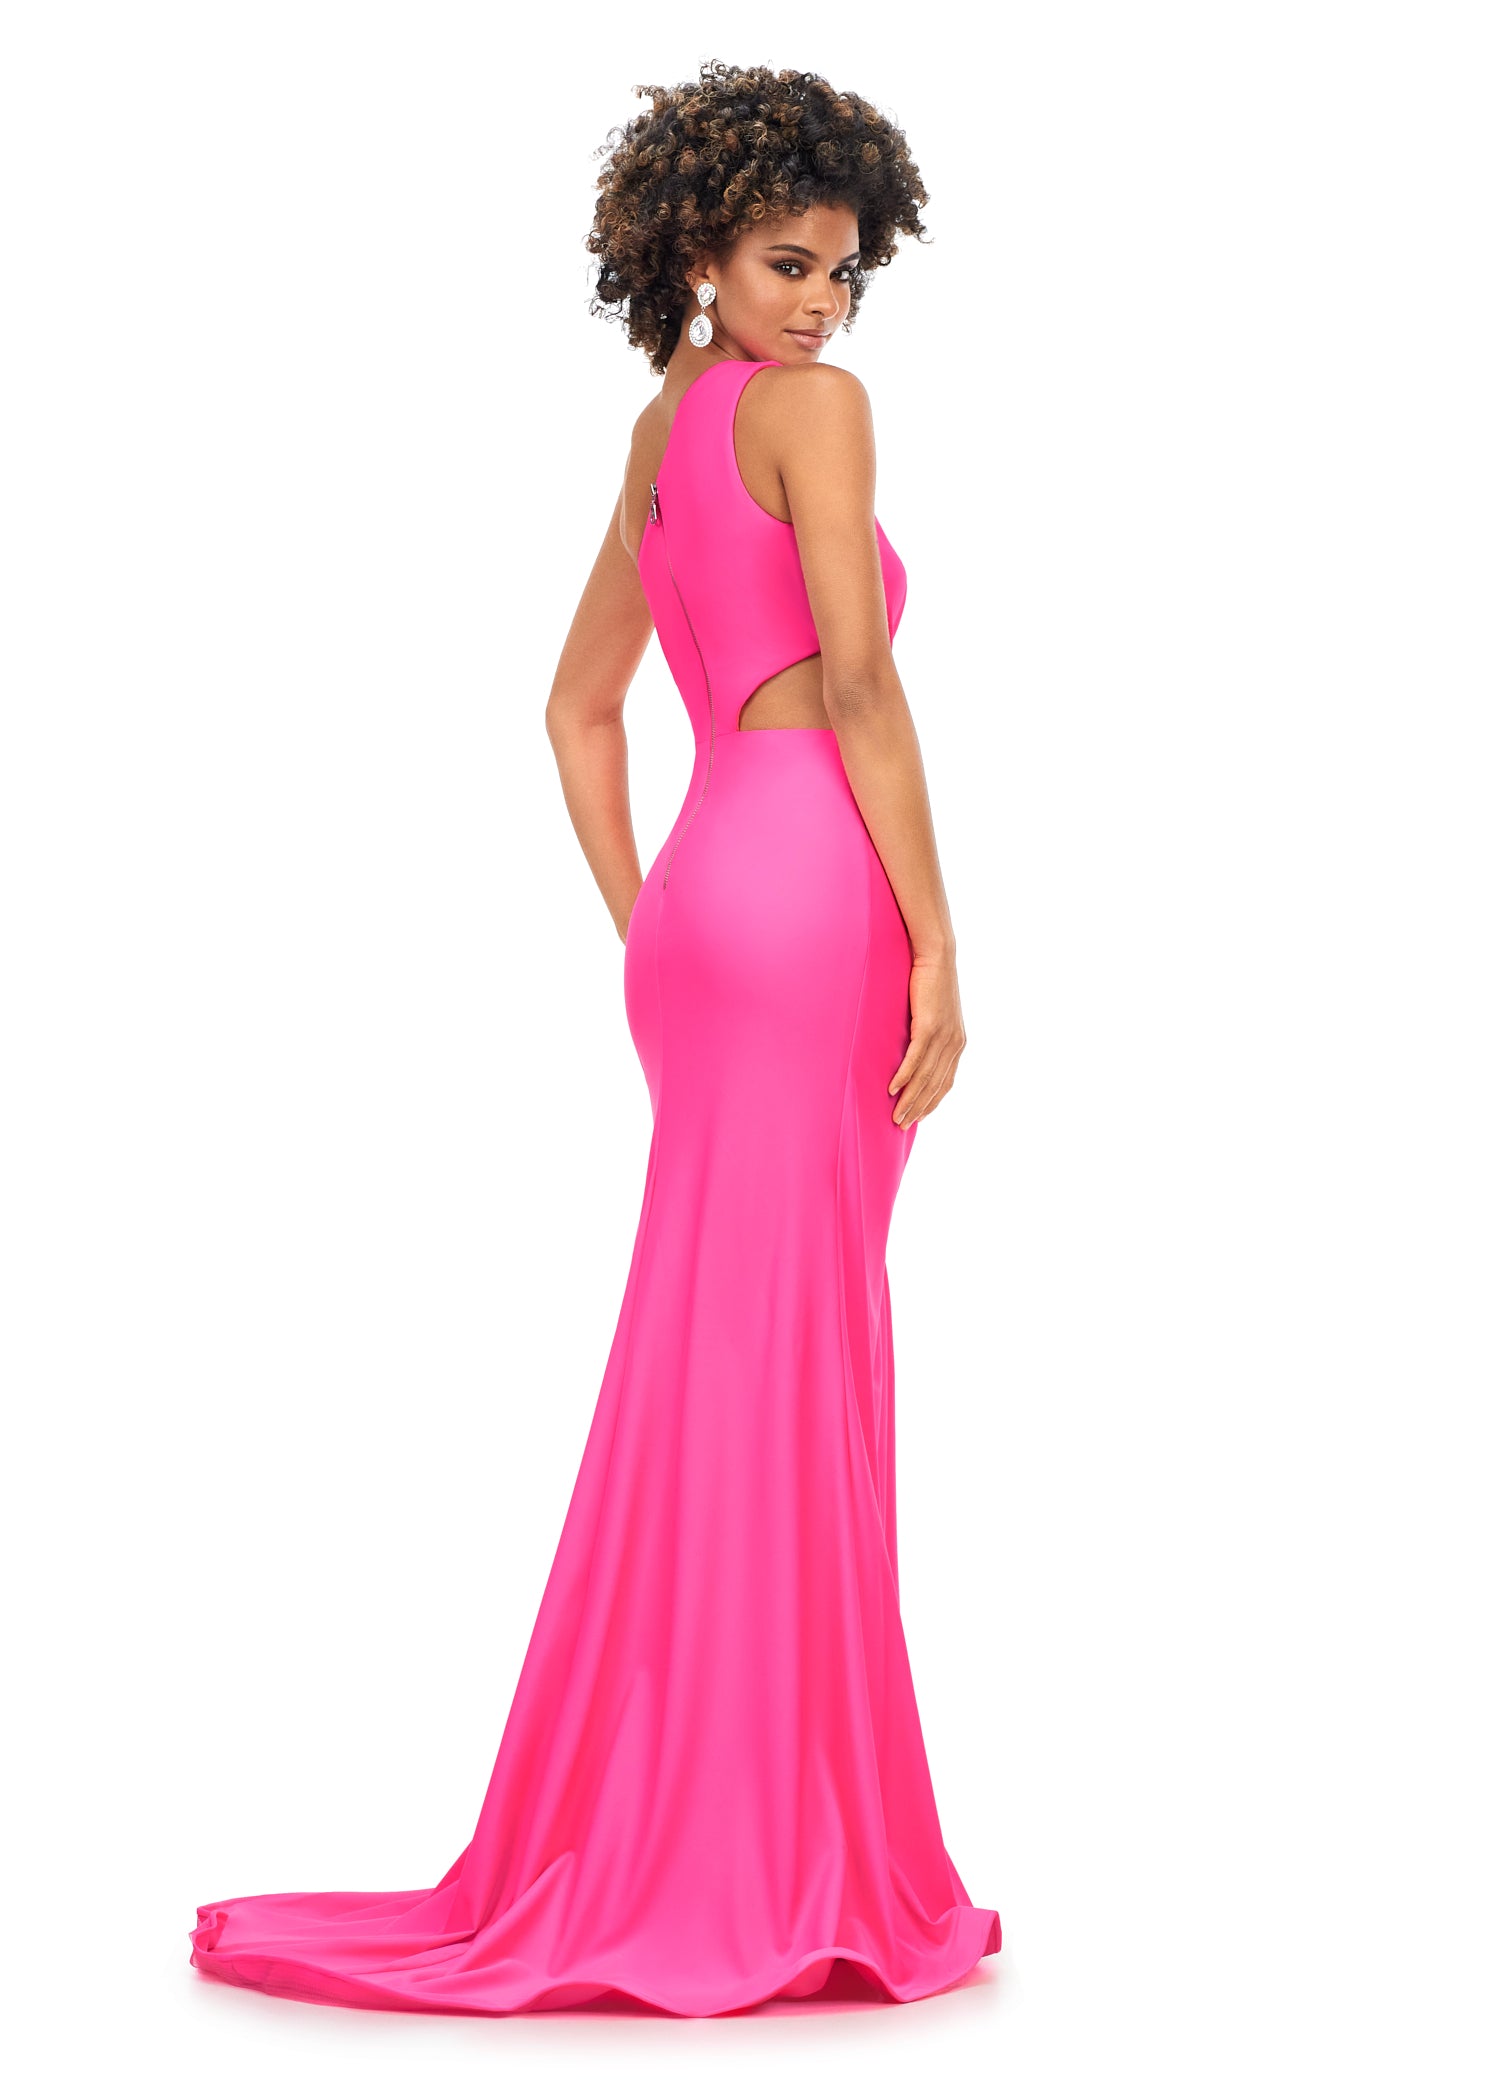 Ashley Lauren 11303 This one shoulder jersey gown features a ruched bodice with asymmetrical cut outs. The ruching continues onto the fitted skirt with slit. The look is complete with an exposed metal zipper back.